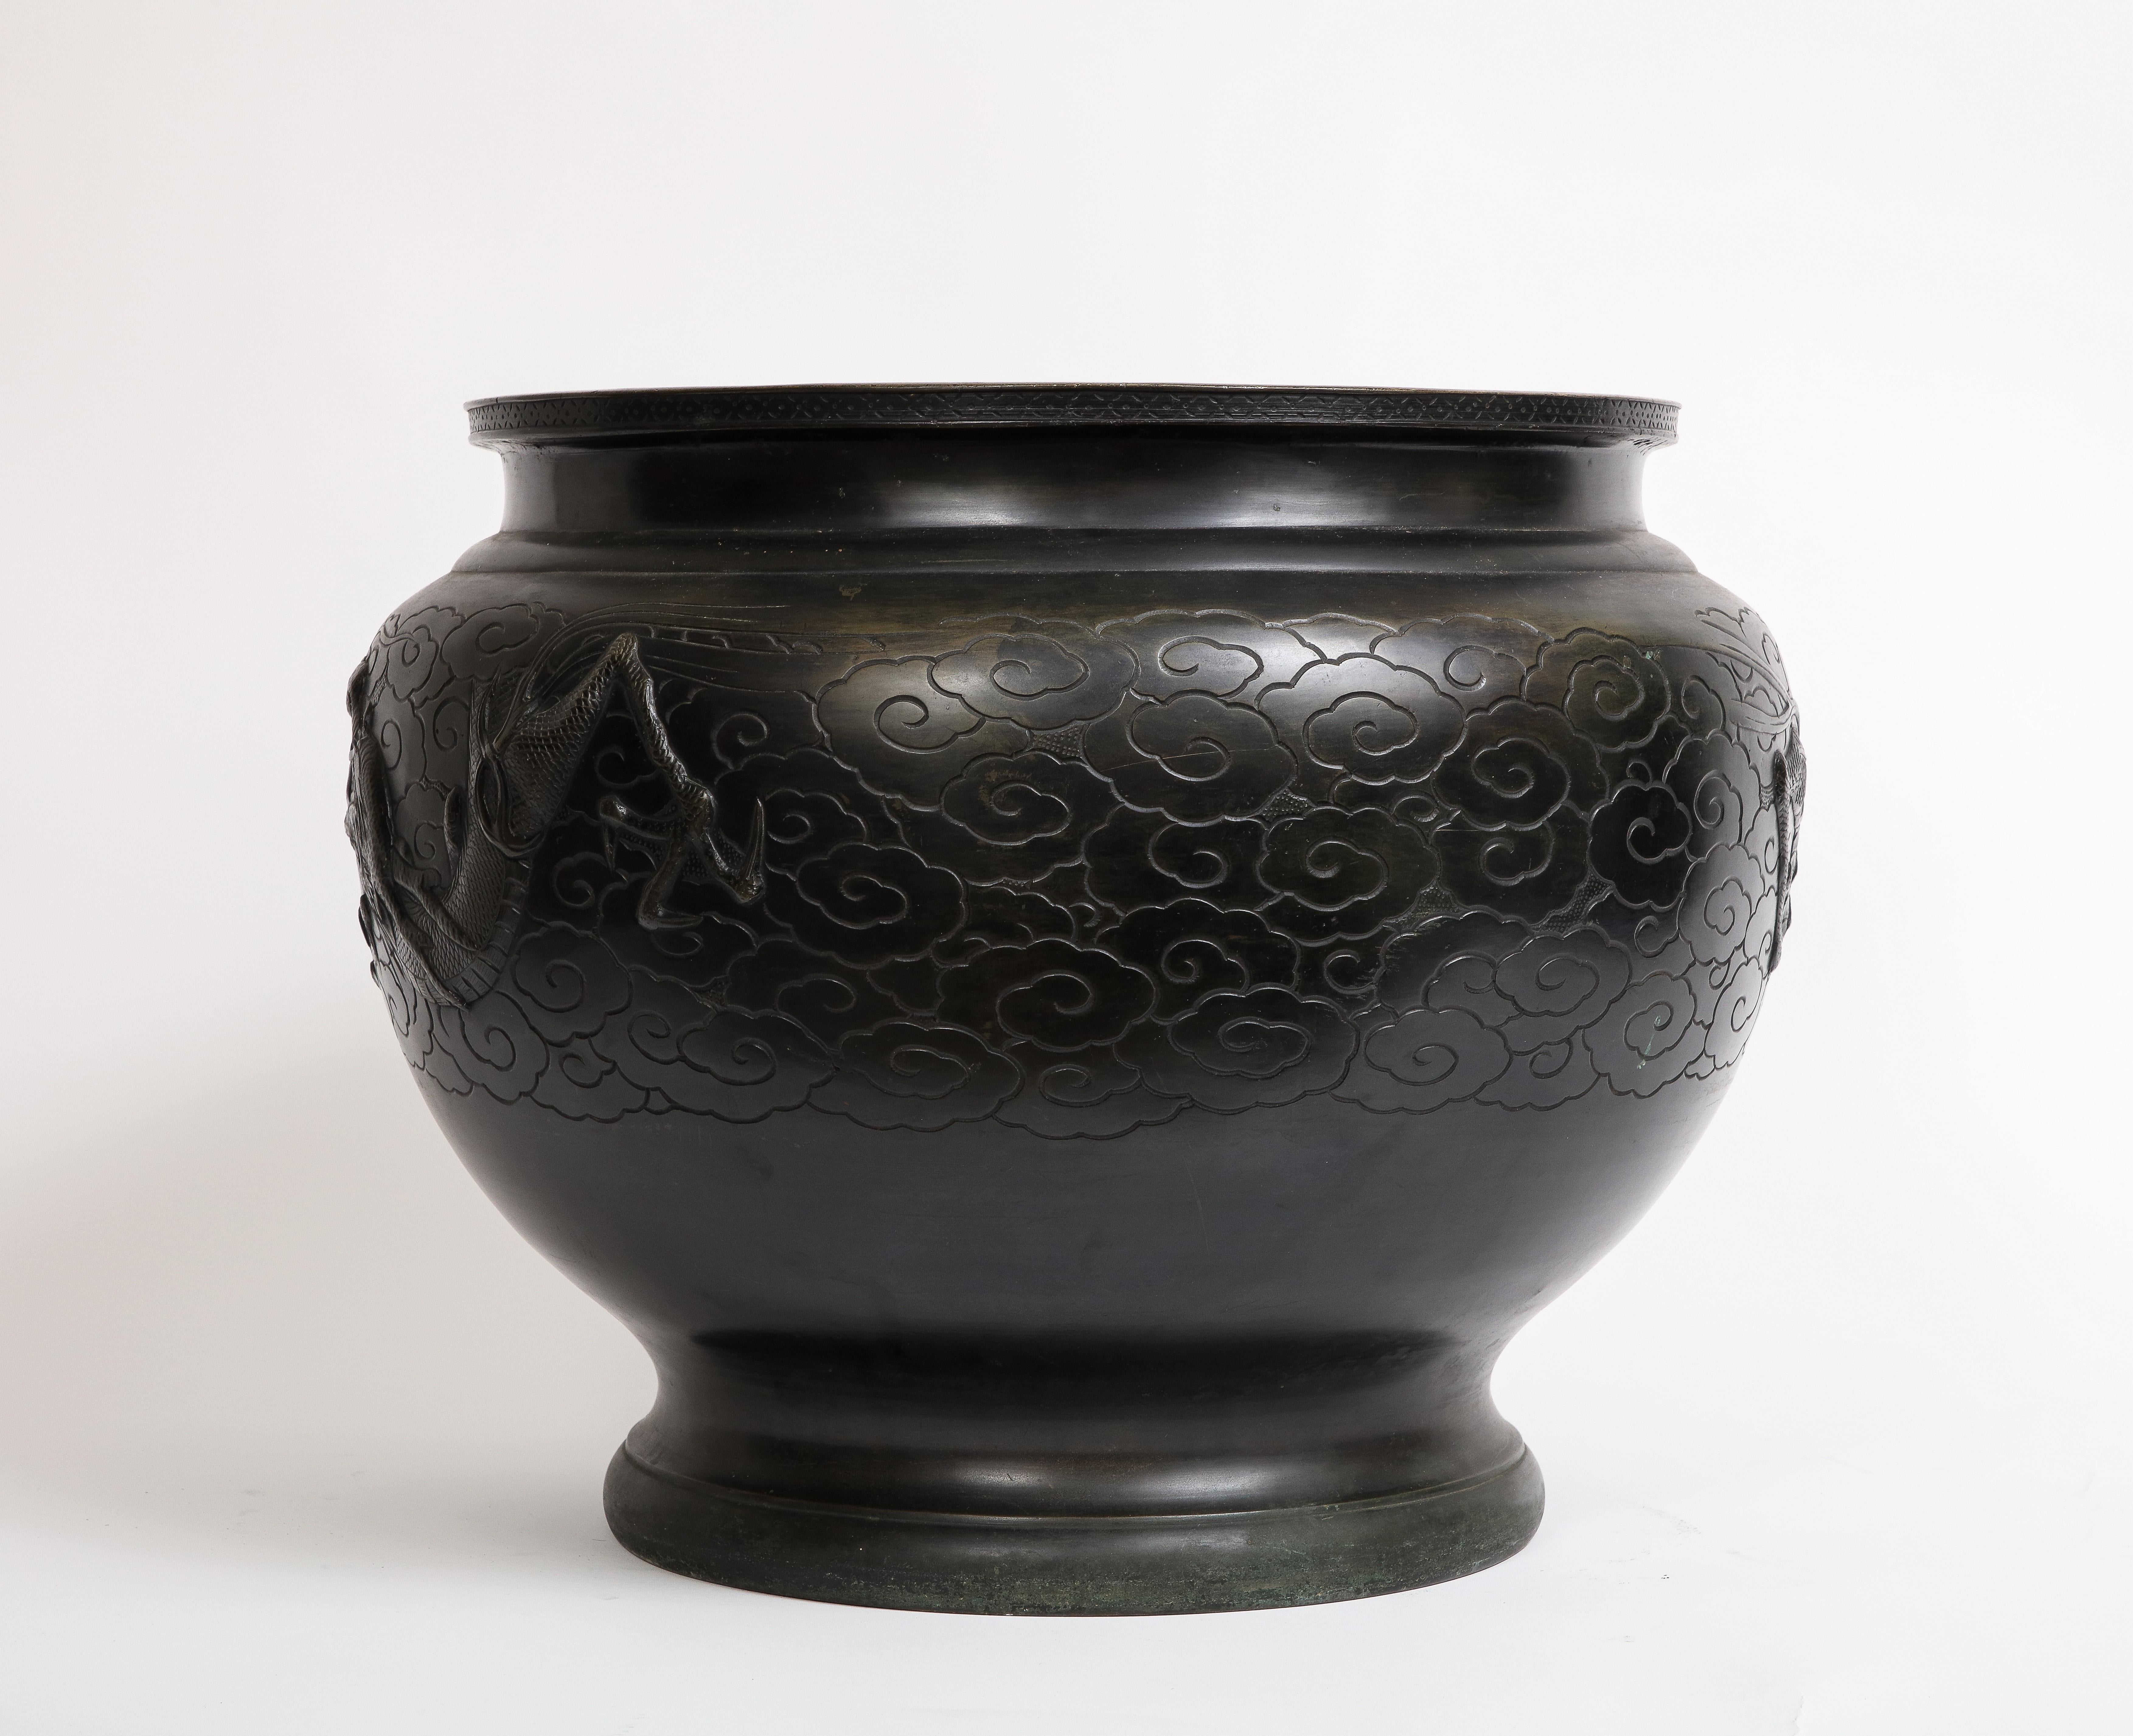 A Fantastic and large Japanese Meiji Period Patinated Bronze Centerpiece/Bowl/jar denier with Dragon in Relief.  This captivating and exquisite, hand-crafted, patinated bronze centerpiece serves as a remarkable focal point, adorned with marvelously